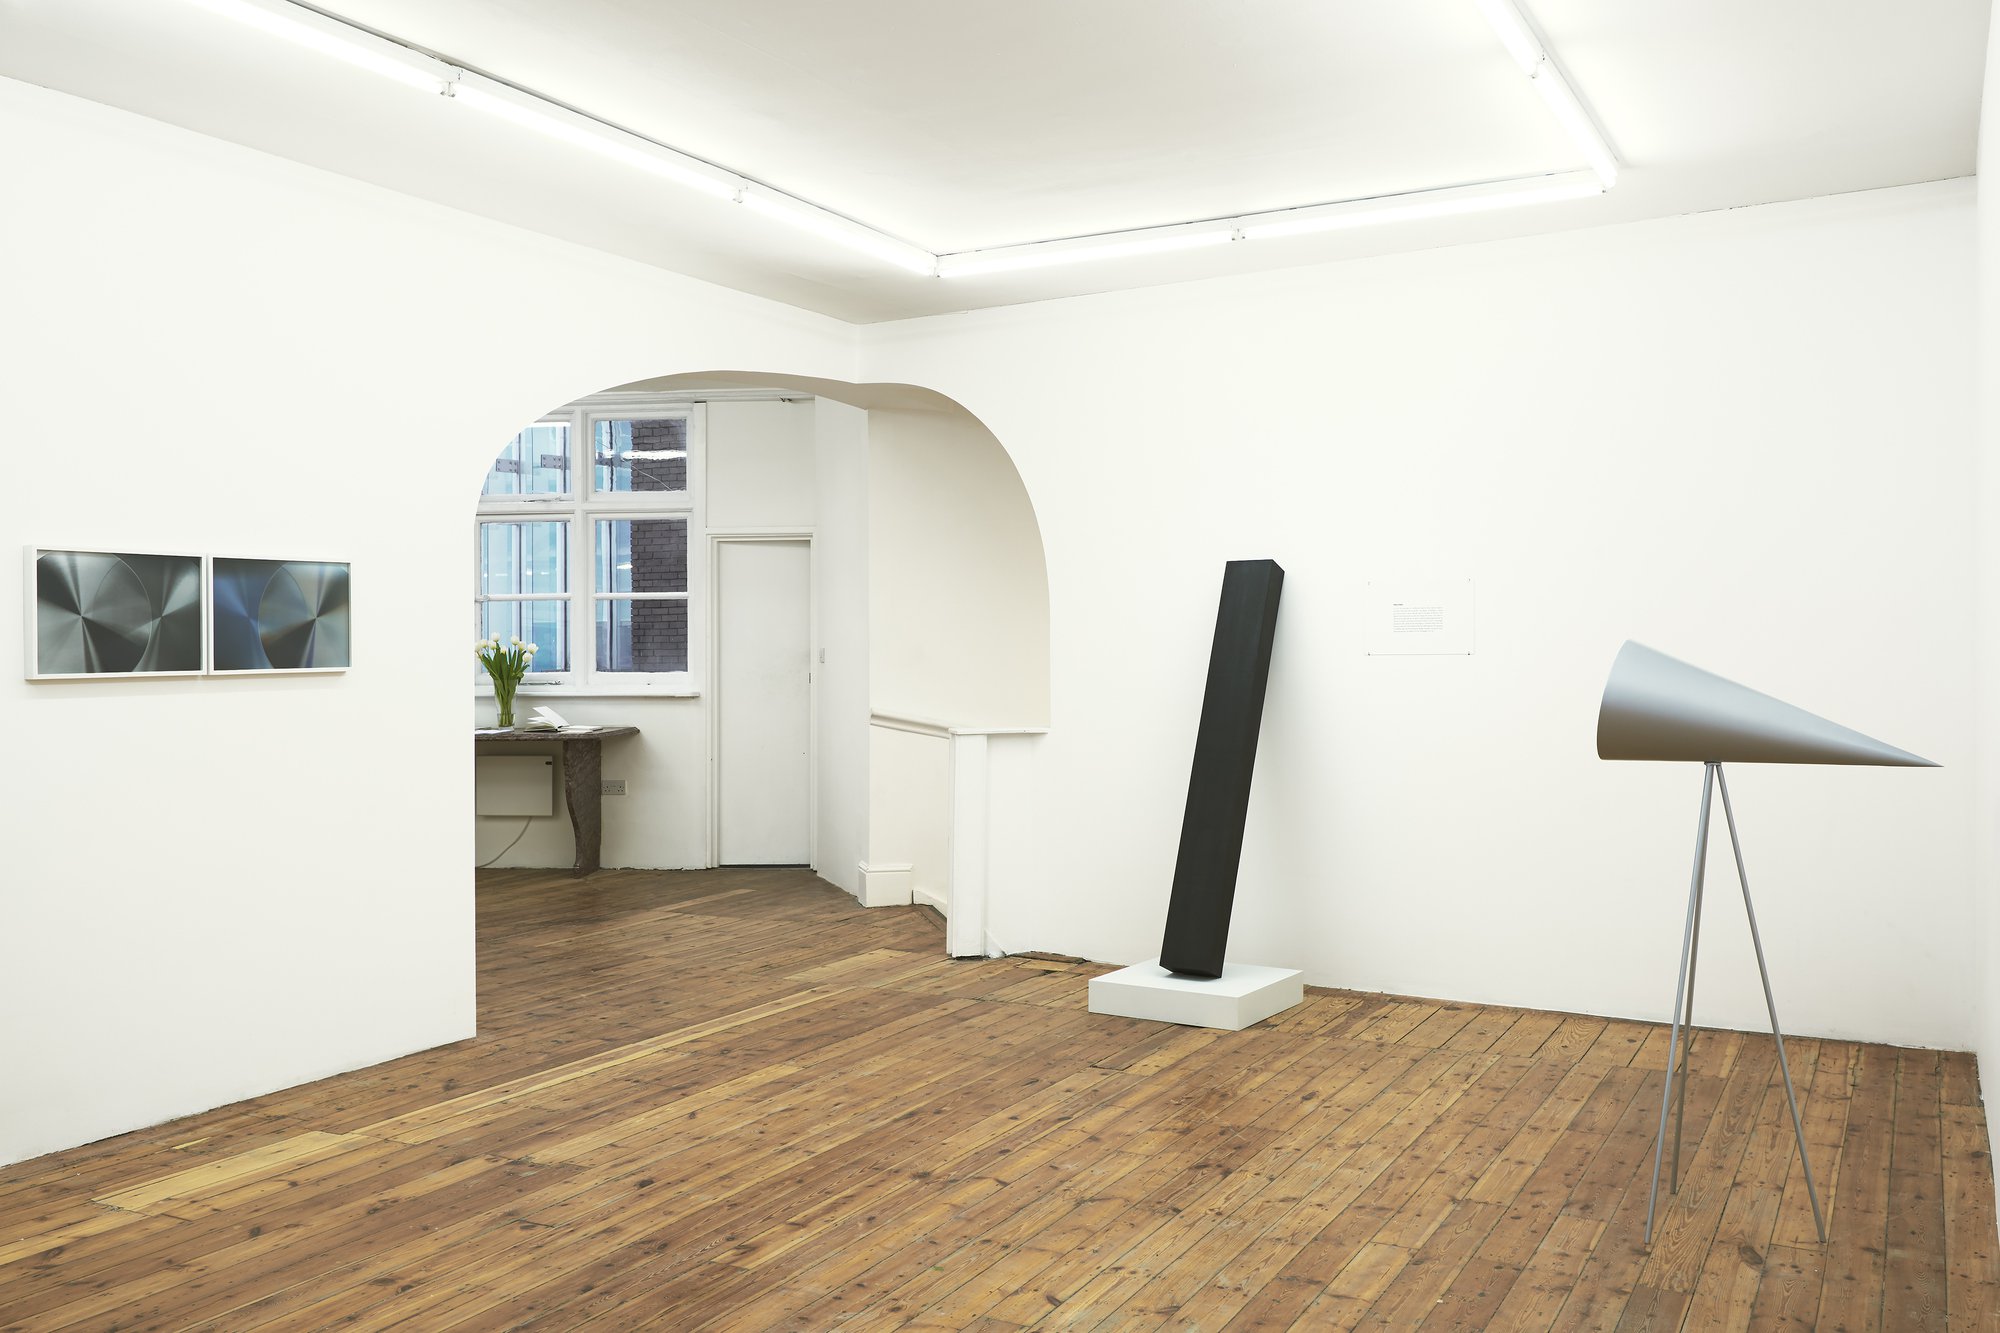 Installation view, Iman Issa, Lexicon, Rodeo, London, 2015